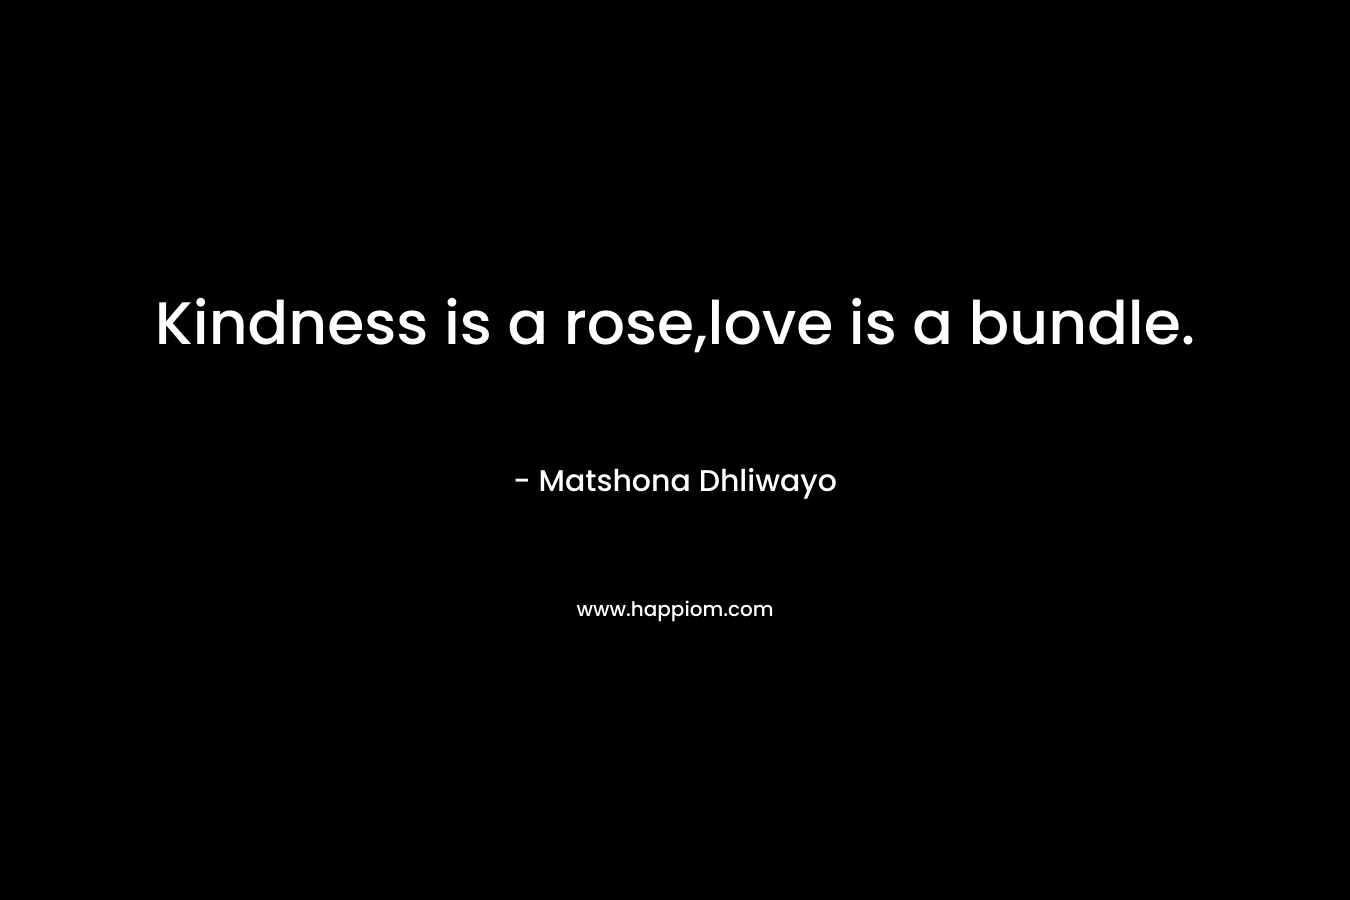 Kindness is a rose,love is a bundle.